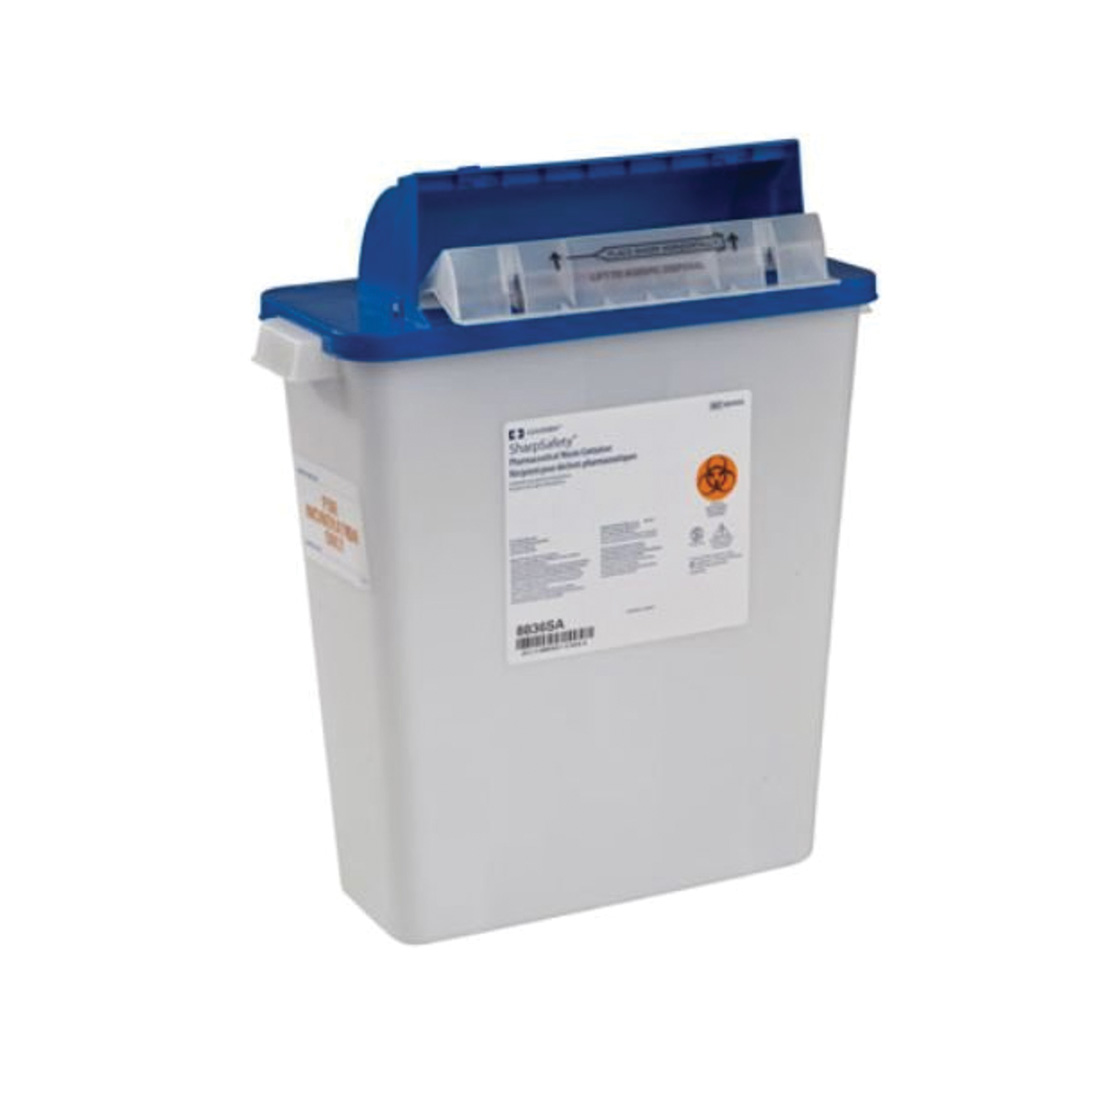 PharmaSafety™ Sharps Container, 3 Gallon PharmaStar™ Container, Tamper-Resistent, Counter-Balanced Lid